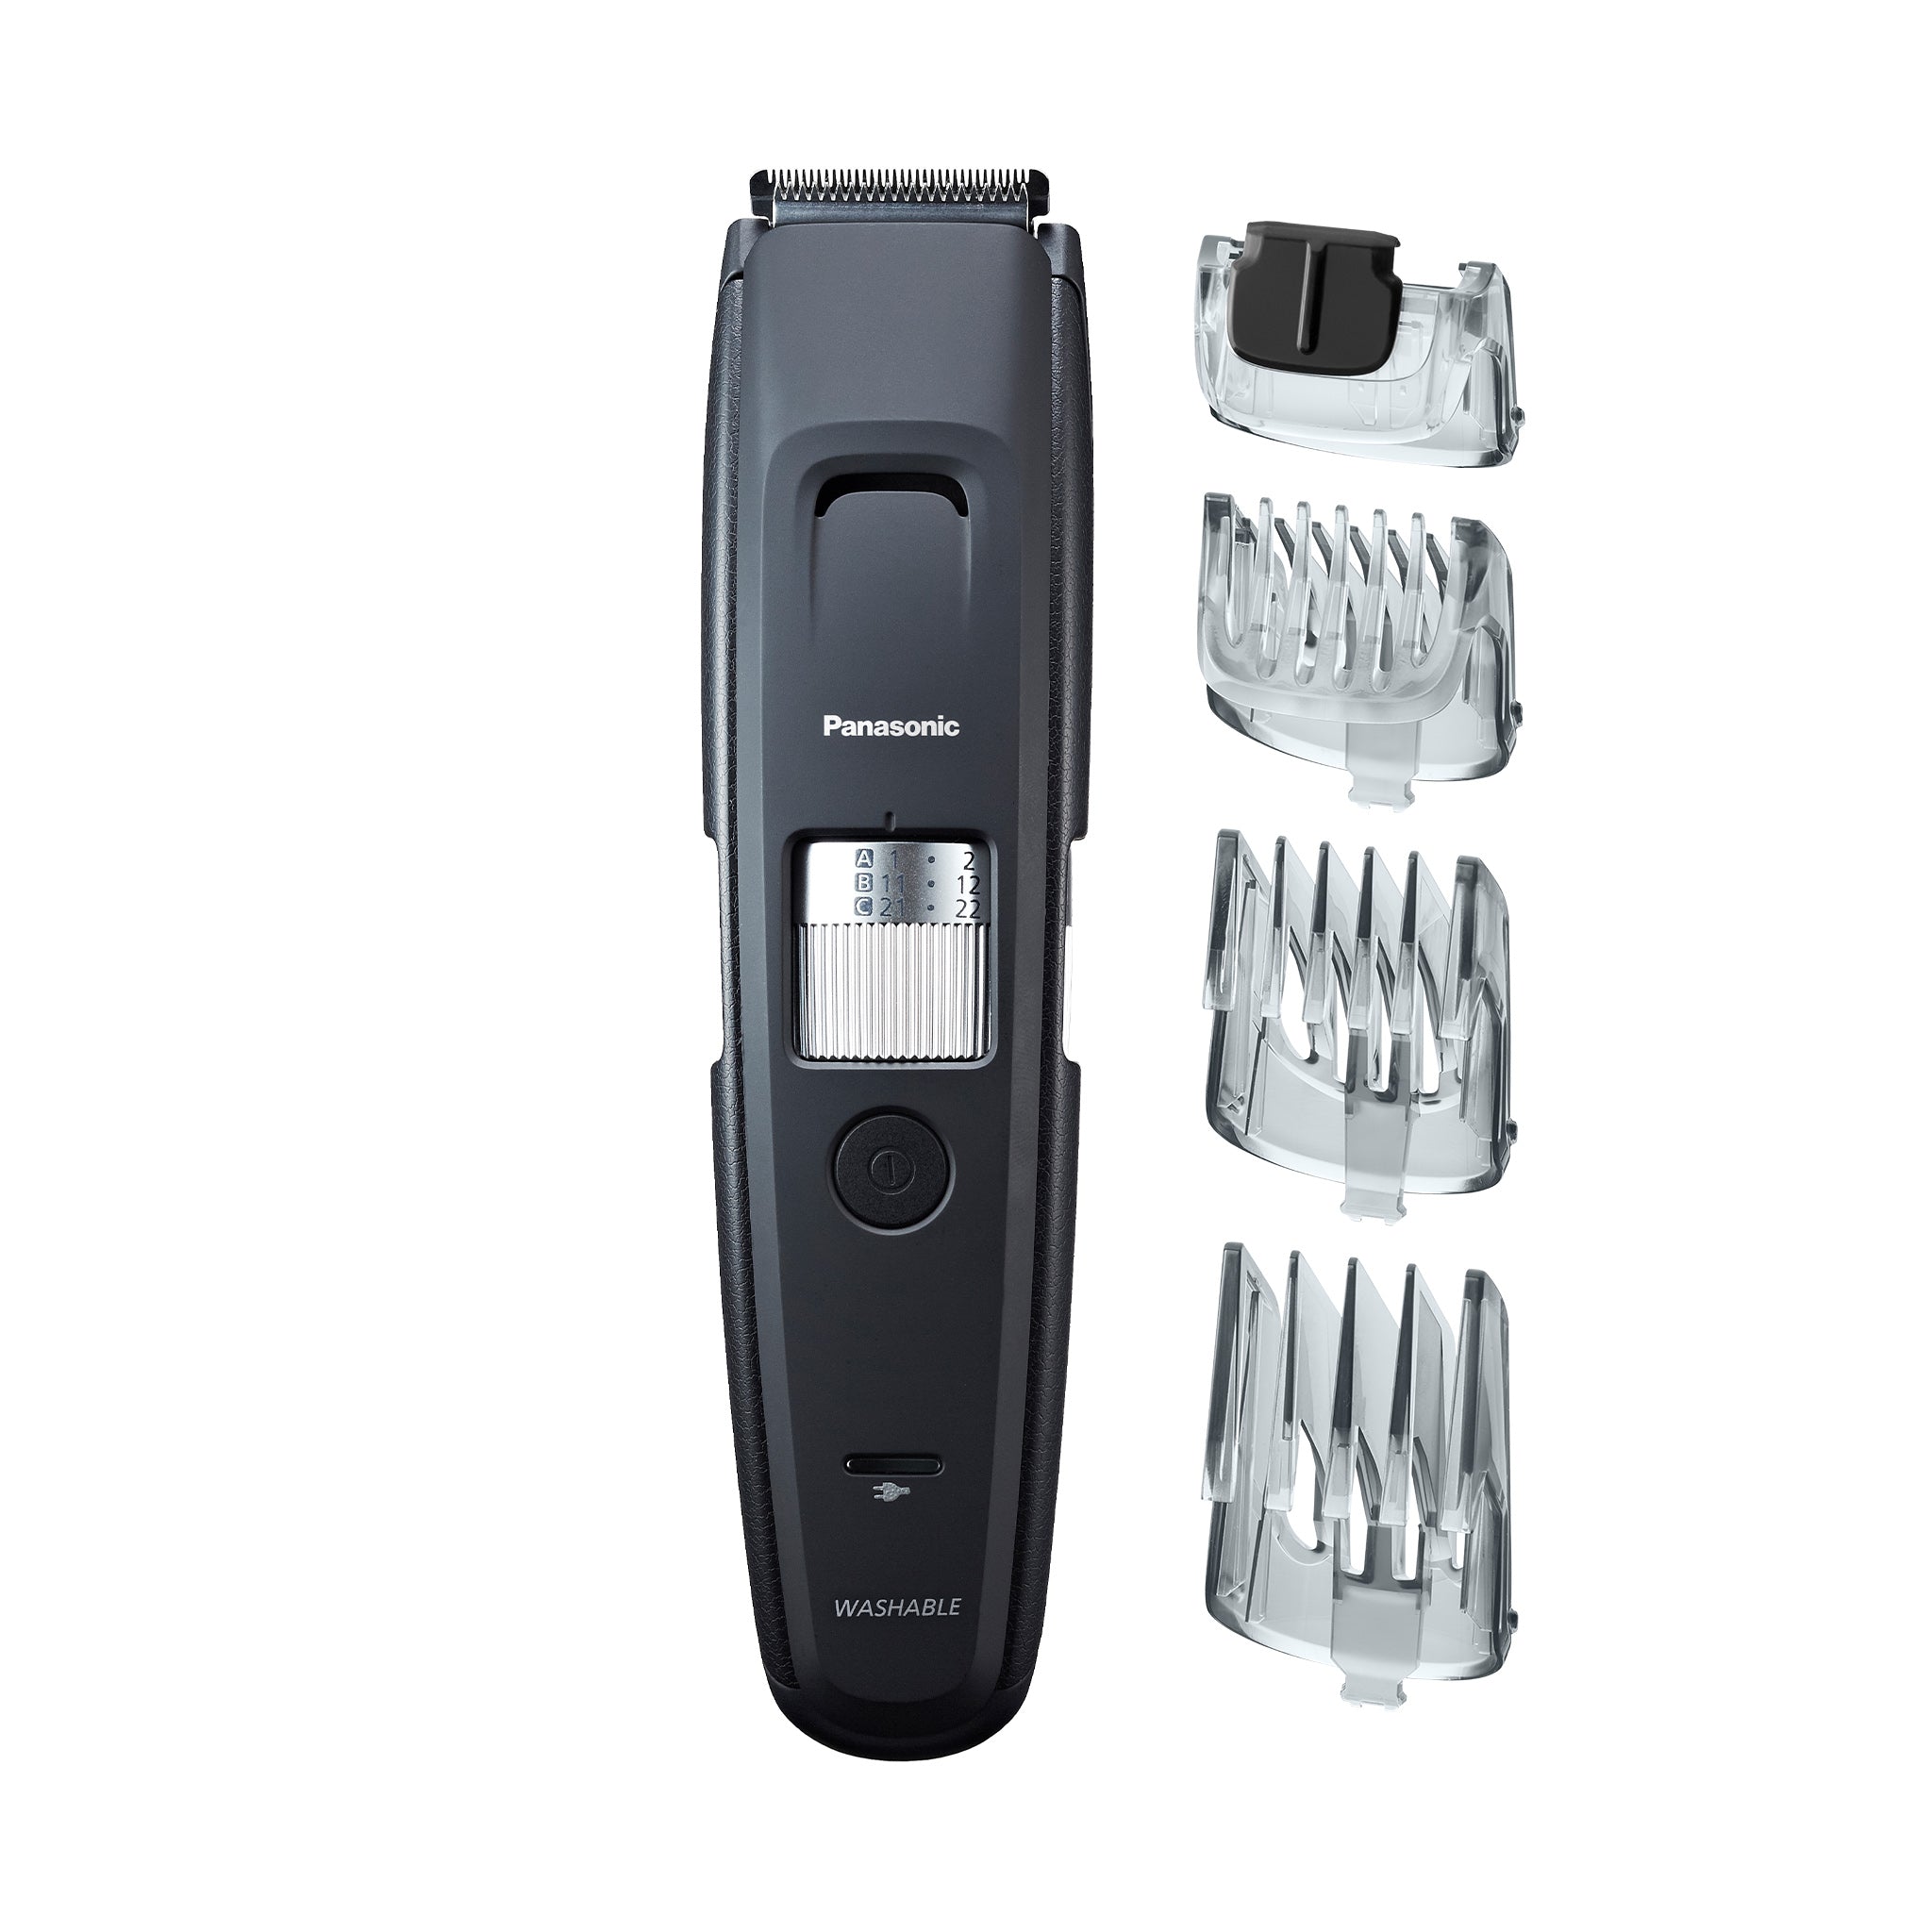 Panasonic Body Hair Groomer with 3 Comb Attachments - ER-GK60-S